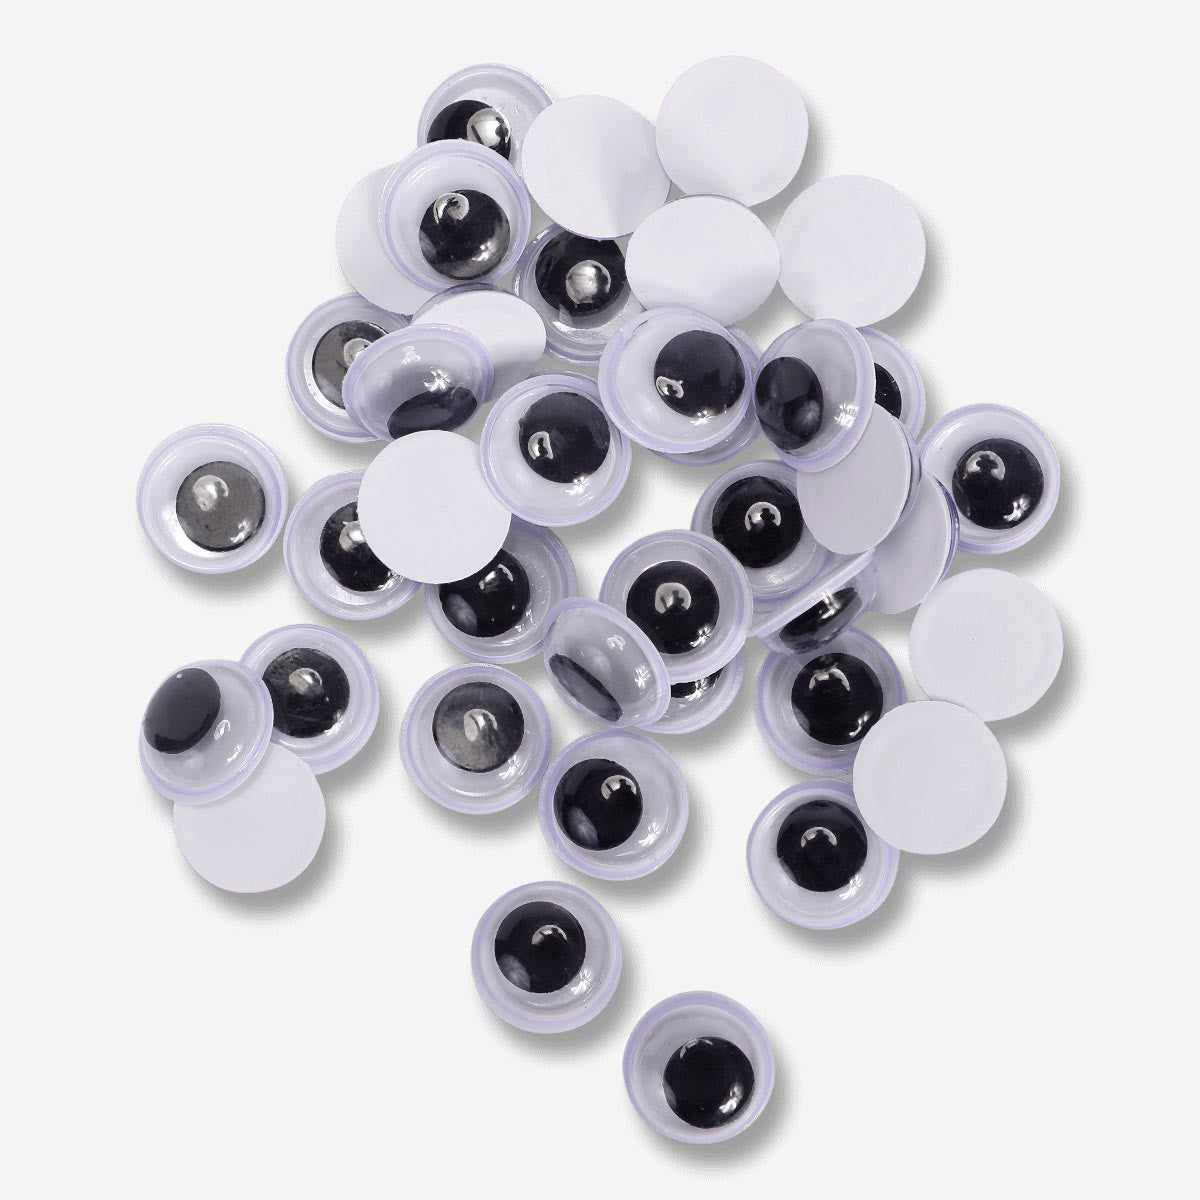 1221 Pieces Wiggle Googly Eyes Self Adhesive Wiggle Eyes (Assorted Sizes)  for DIY Crafts Scrapbooking (Classic & Assorted Colors)